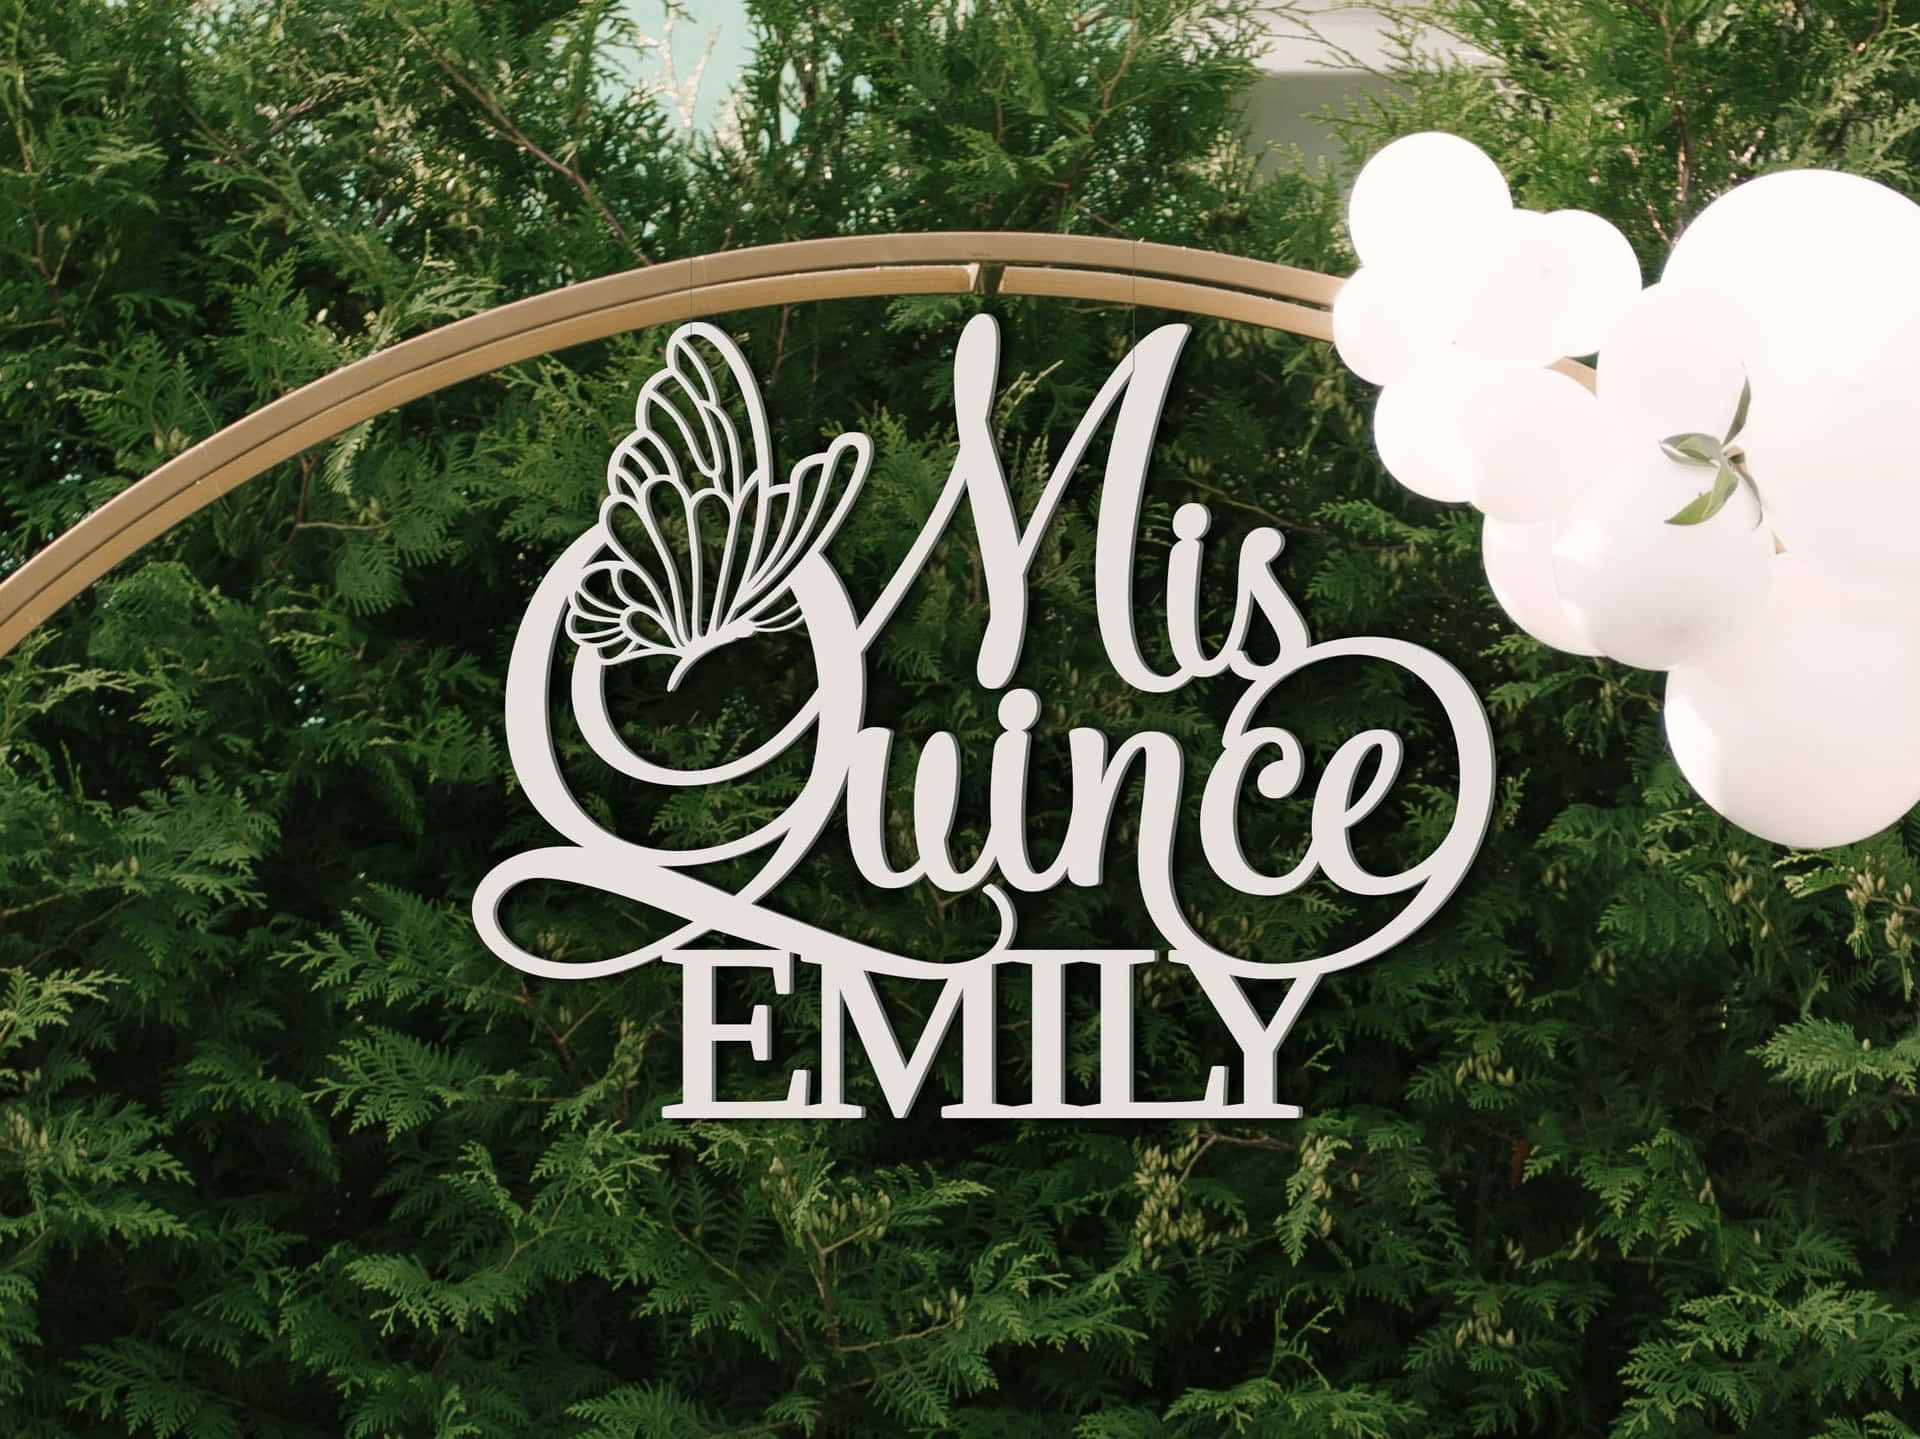 A Wooden Sign With The Word Mrs Quince Emily